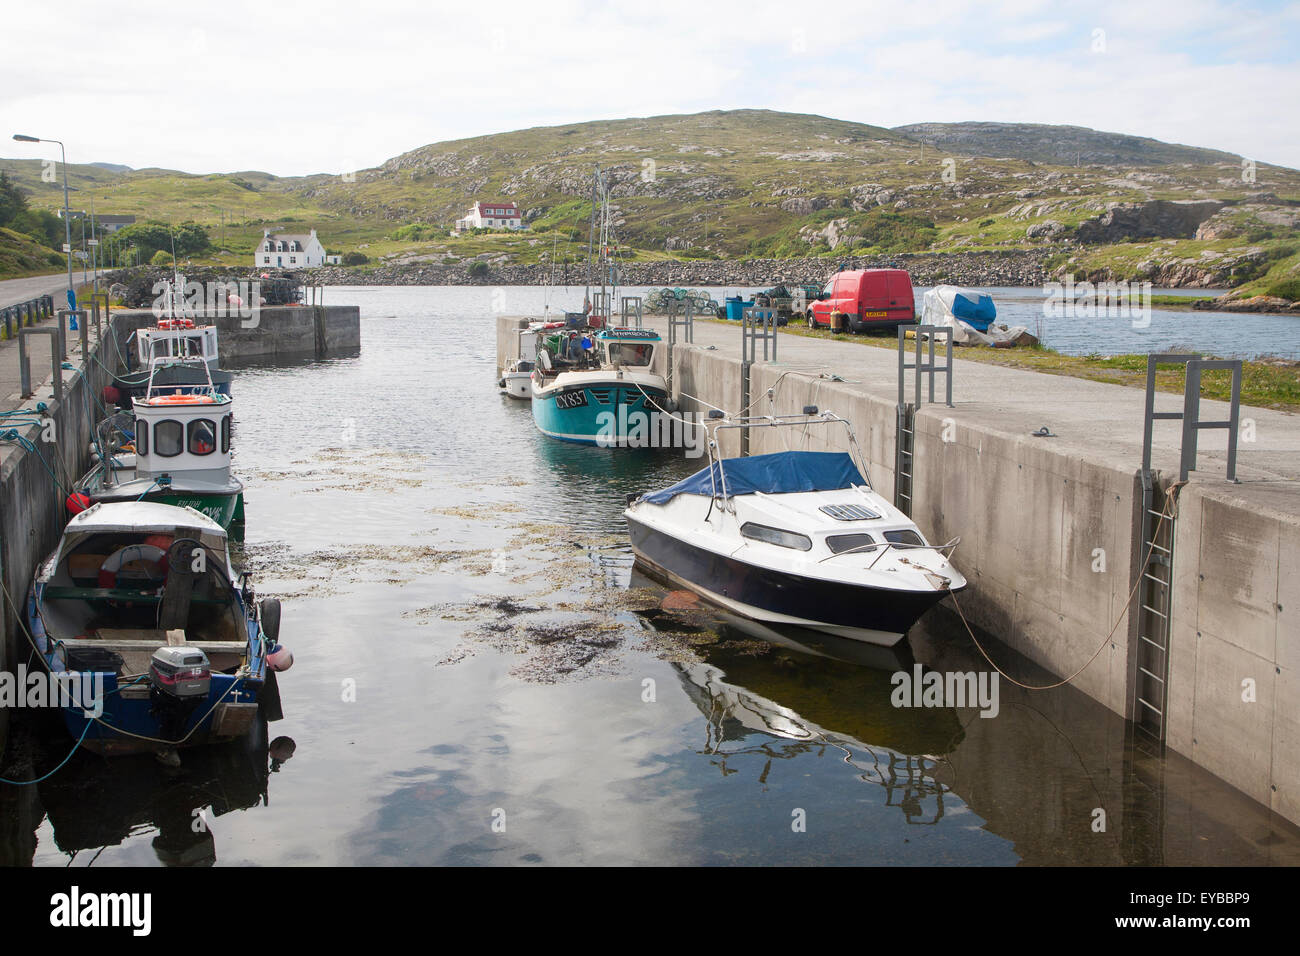 Small fishing boats in harbour at Northbay, Barra, Outer Hebrides, Scotland, UK Stock Photo